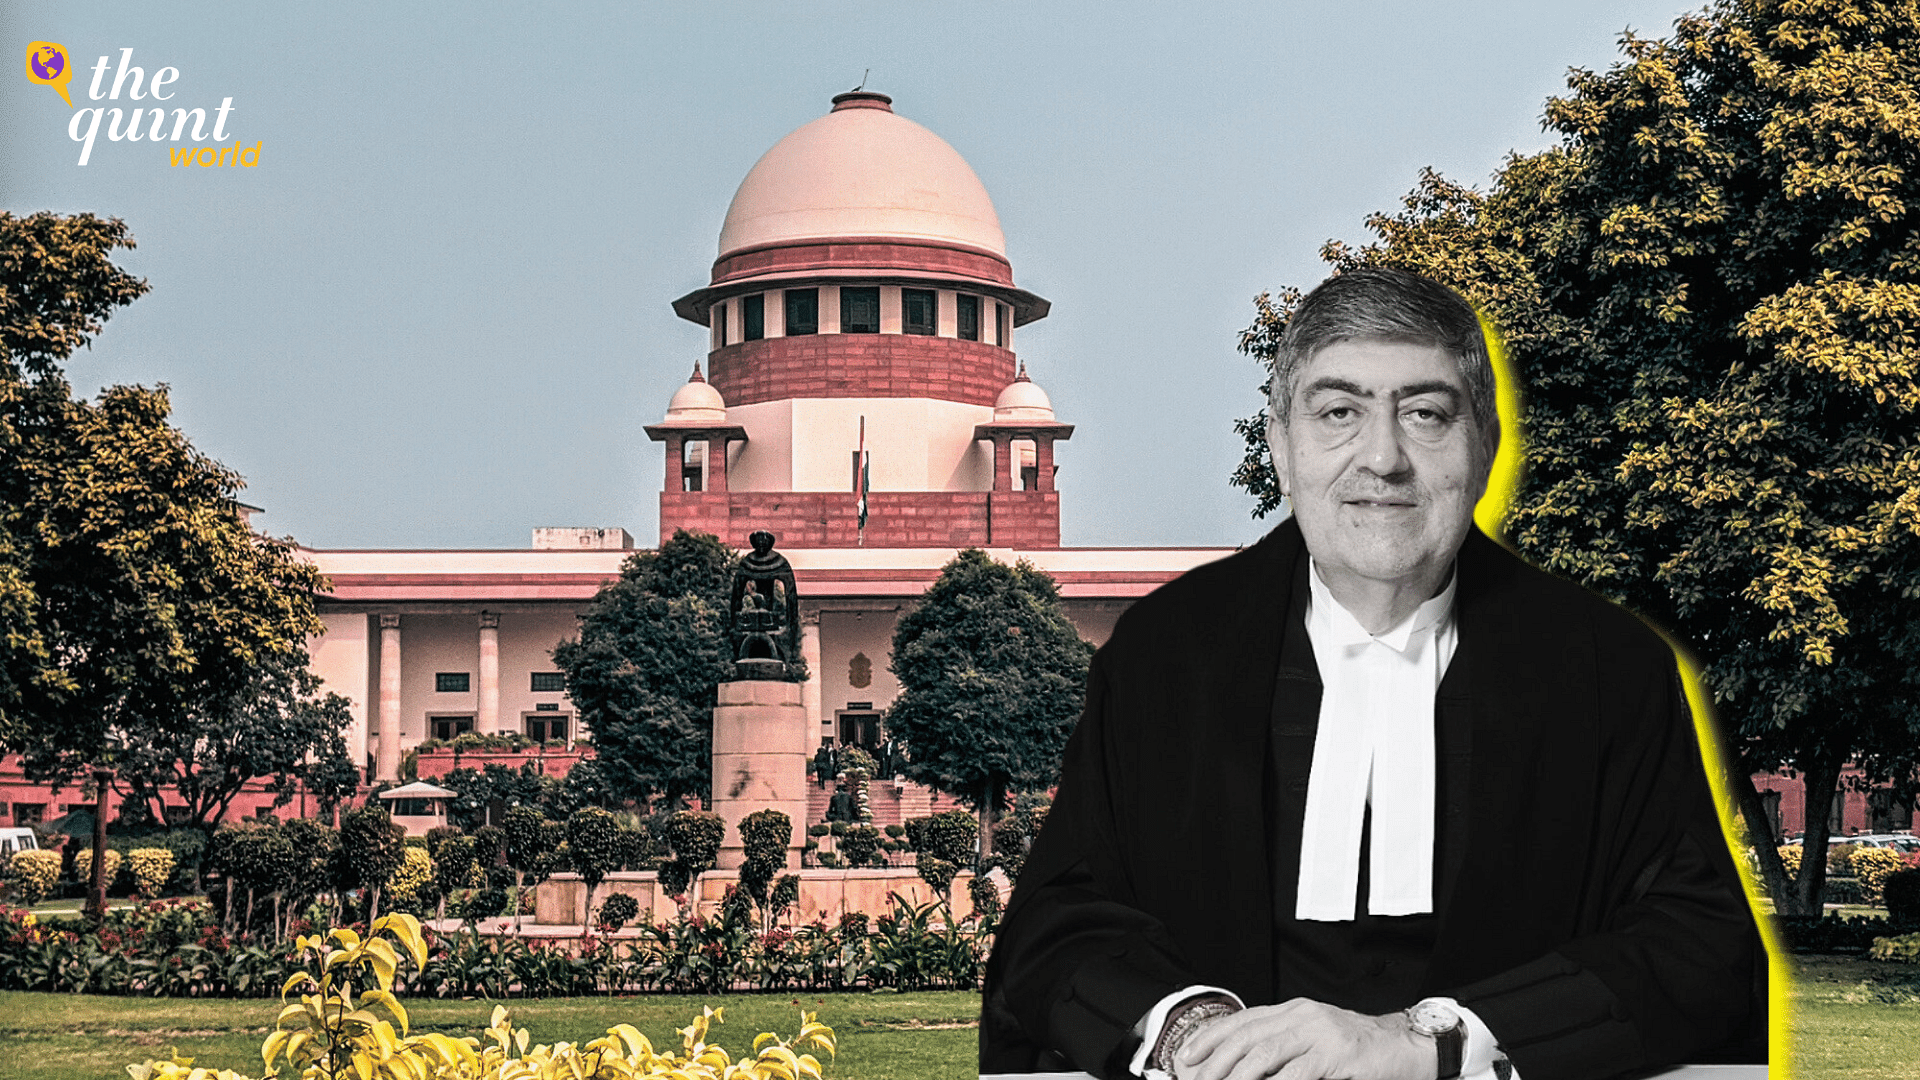 <div class="paragraphs"><p>Justice Sanjay Kishan Kaul, one of the five judges on the five-judge Supreme Court Bench that upheld the central government’s a<a href="https://www.thequint.com/news/law/why-modi-govt-won-article-370-abrogation-case-7-aspects-of-supreme-court-verdict-explained#:~:text=The%20Quint%20DAILY&amp;text=In%20a%20unanimous%20verdict%2C%20the,second%20shot%20at%20the%20Centre.">brogation of Article 370</a>, had advocated for the establishment of an "impartial Truth and Reconciliation Commission" (TRCs).</p></div>